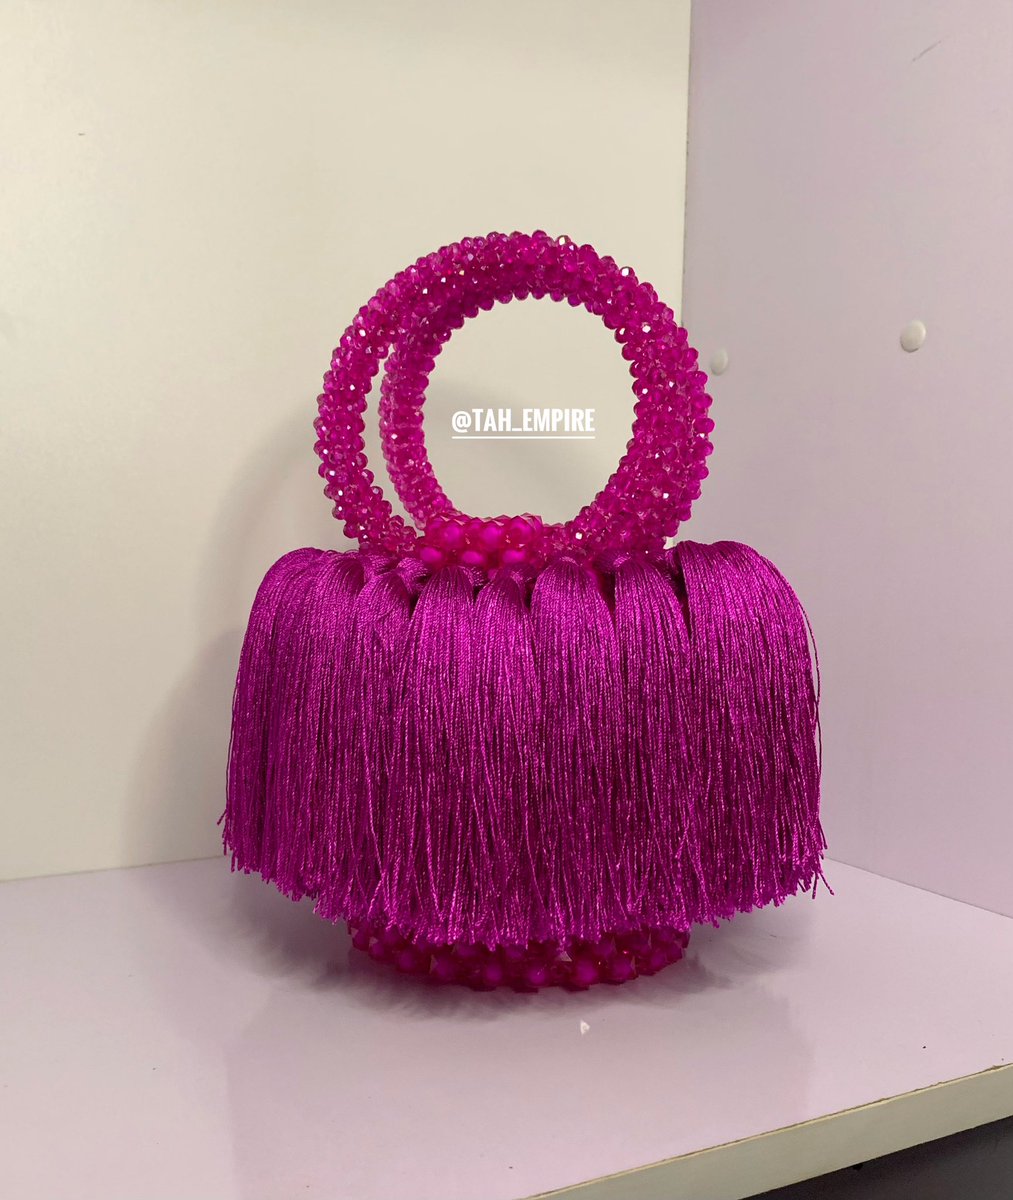 MOTUN TASSEL Bag has remained one of our handmade products that add a unique touch to your outfits. 🥰 Price: #22,000 (Available in your preferred color) Location: Ibadan Which is your favorite? From This 😁 To That 🩷